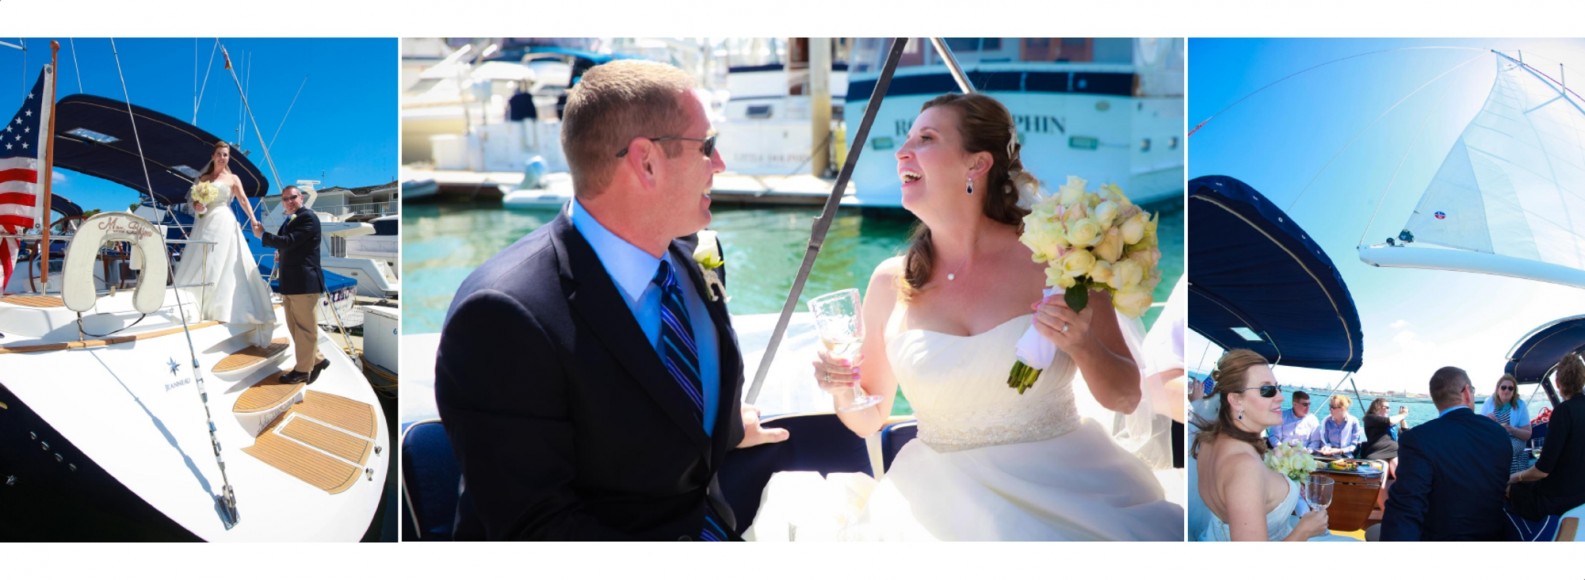 Laura and Davids Wedding Book - San Diego Yacht Wedding by Wedding Photographers Andrew Abouna - Pages 10-11